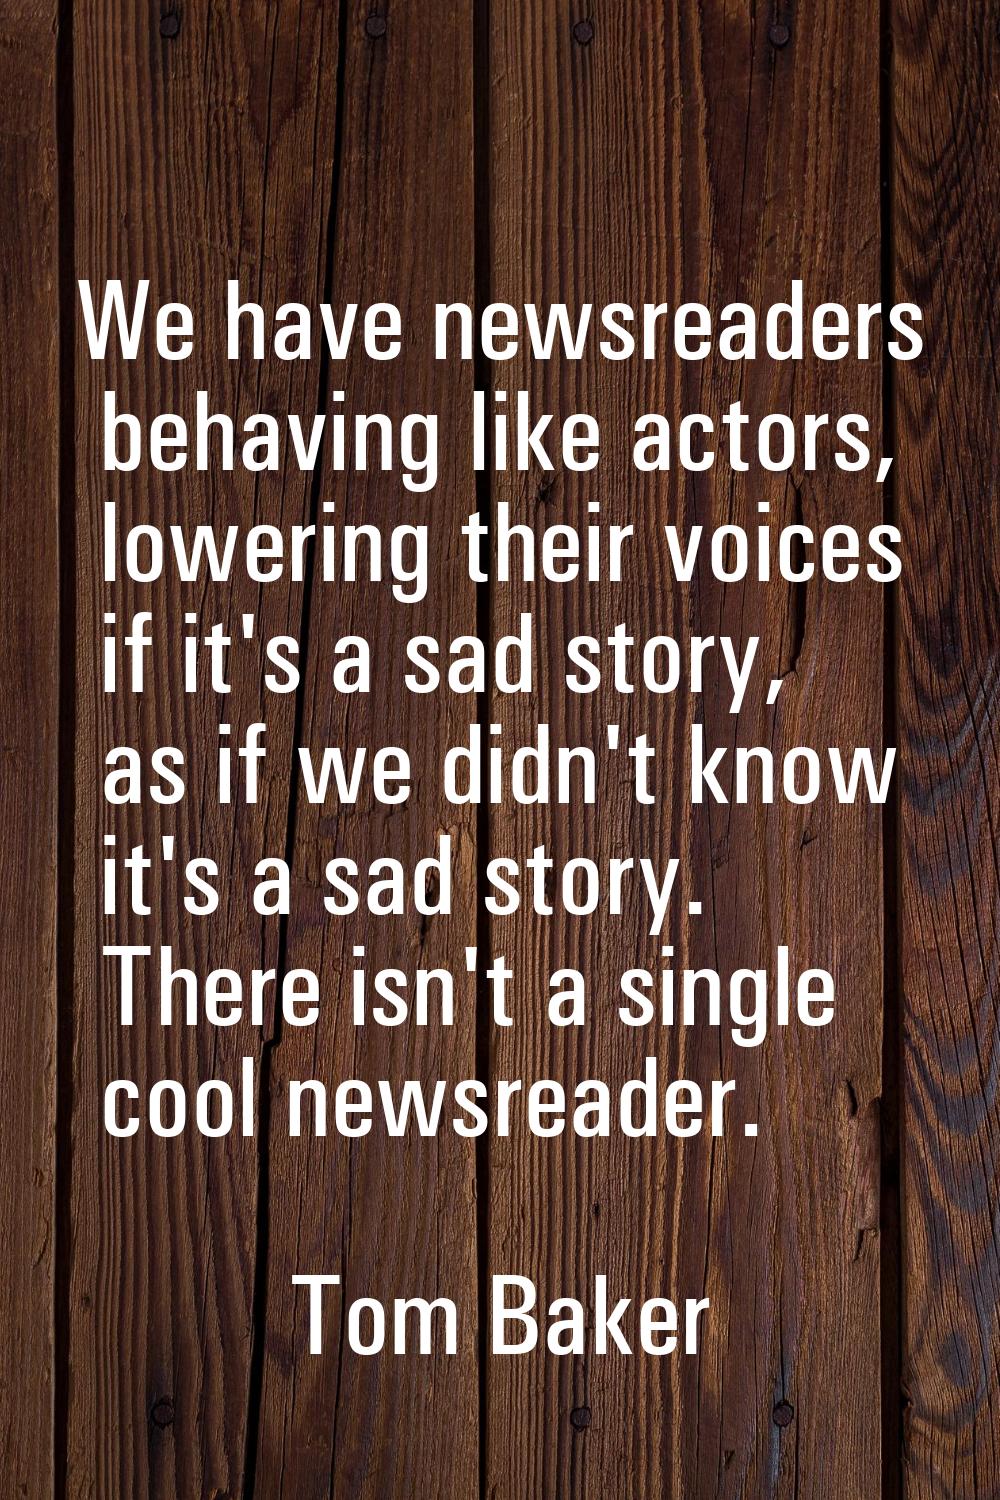 We have newsreaders behaving like actors, lowering their voices if it's a sad story, as if we didn'